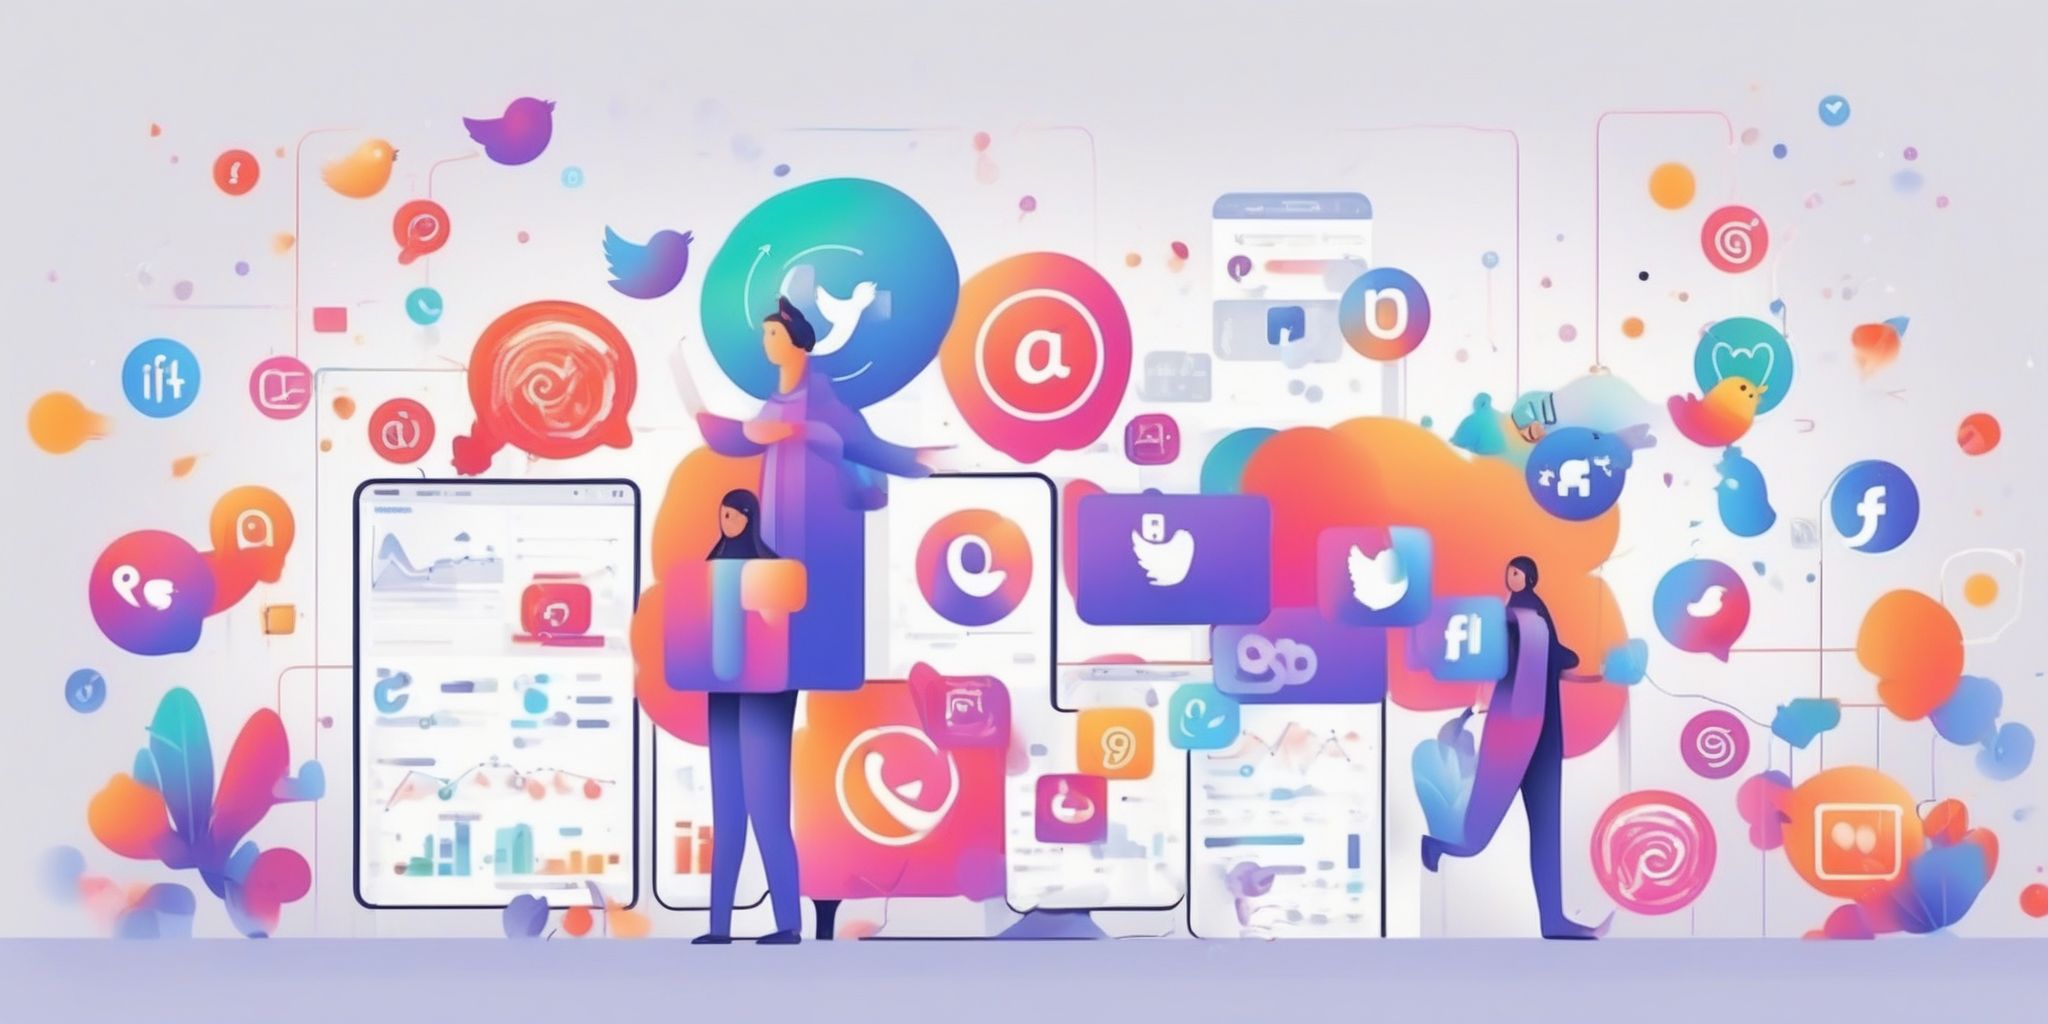 Social media marketing in illustration style with gradients and white background